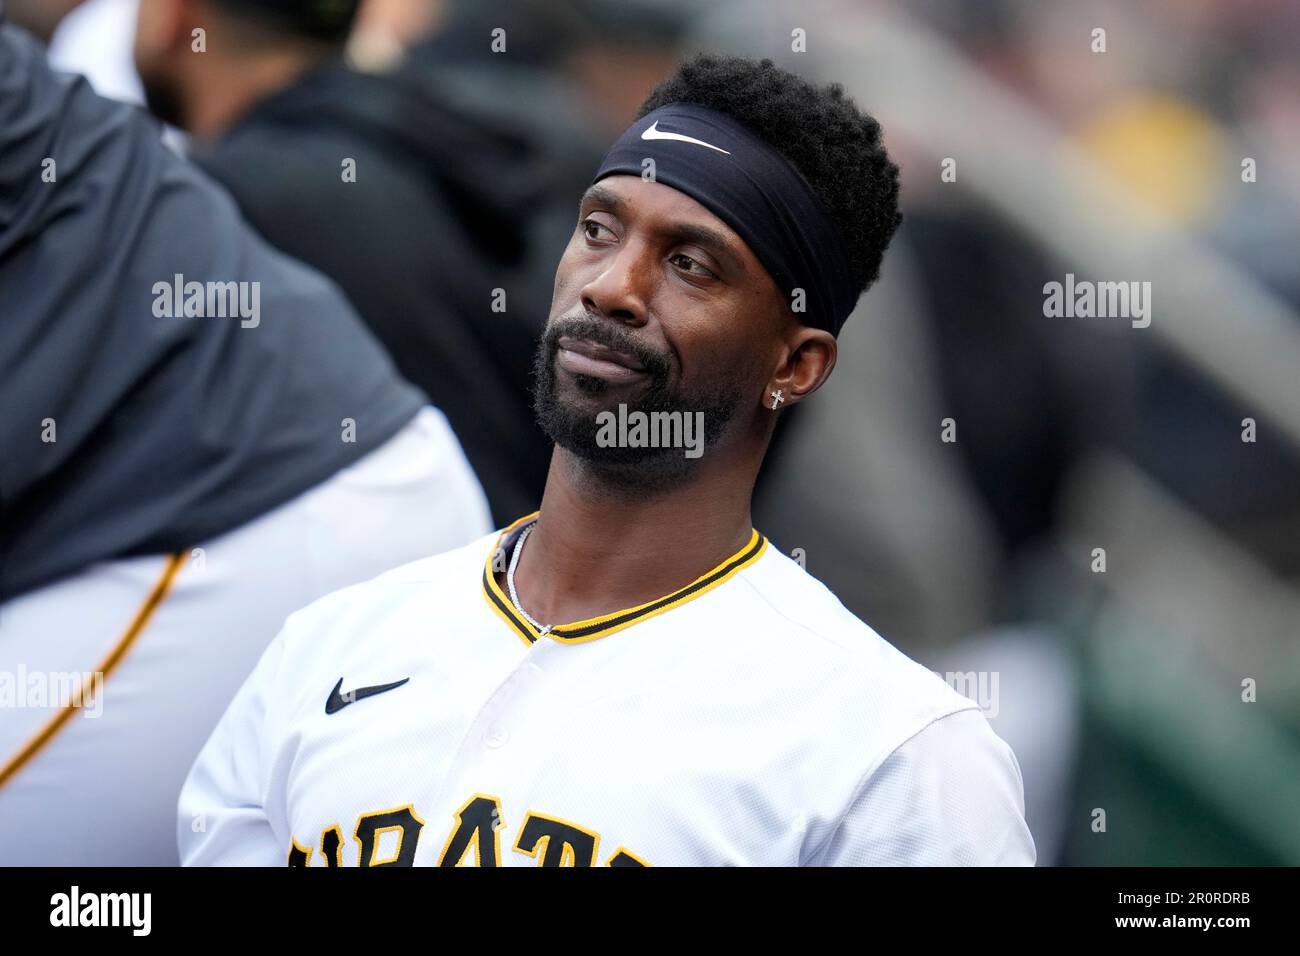 Pittsburgh Pirates' Andrew McCutchen stands in the dugout before a